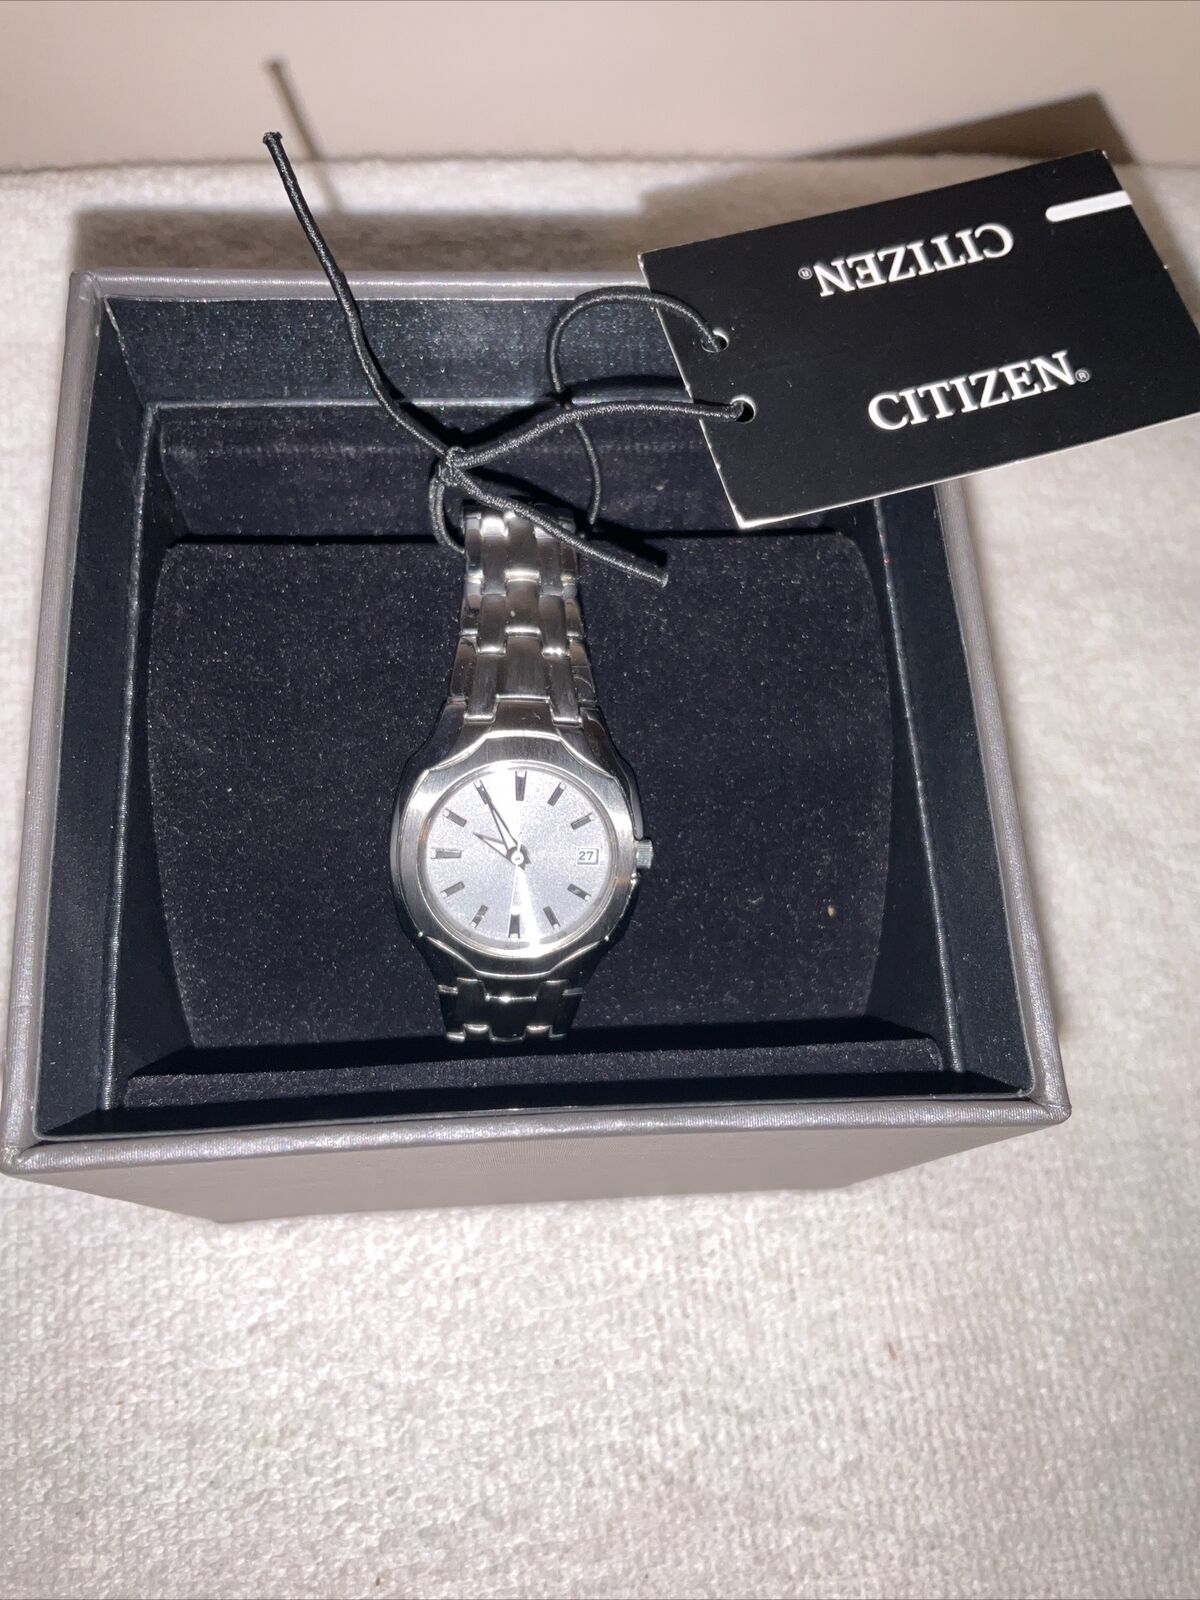 Citizen Watch EW1250-54A?Eco Drive?Silver?Dial Date?NEW?MRSP$275